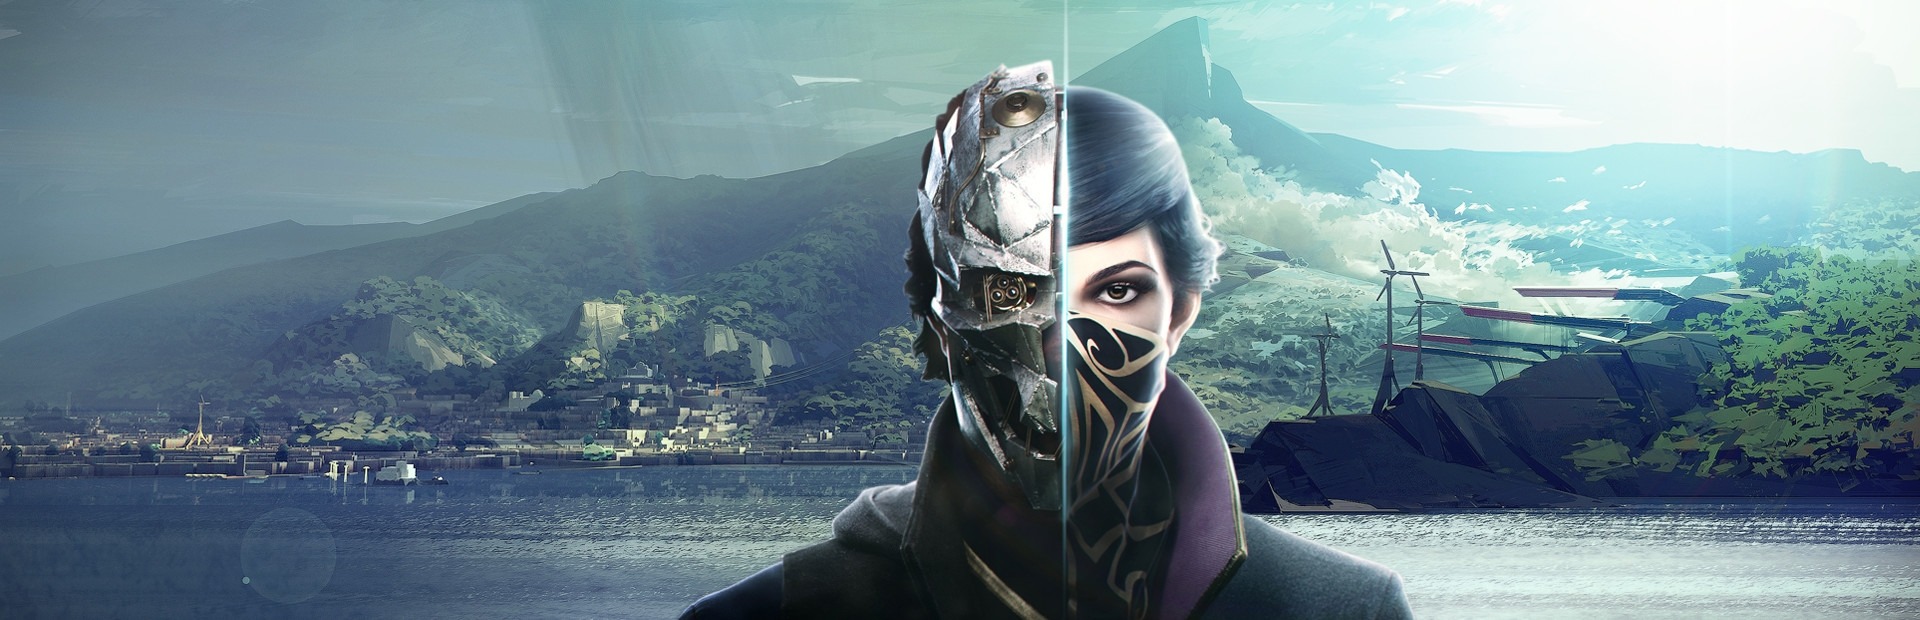 Dishonored: Complete Collection